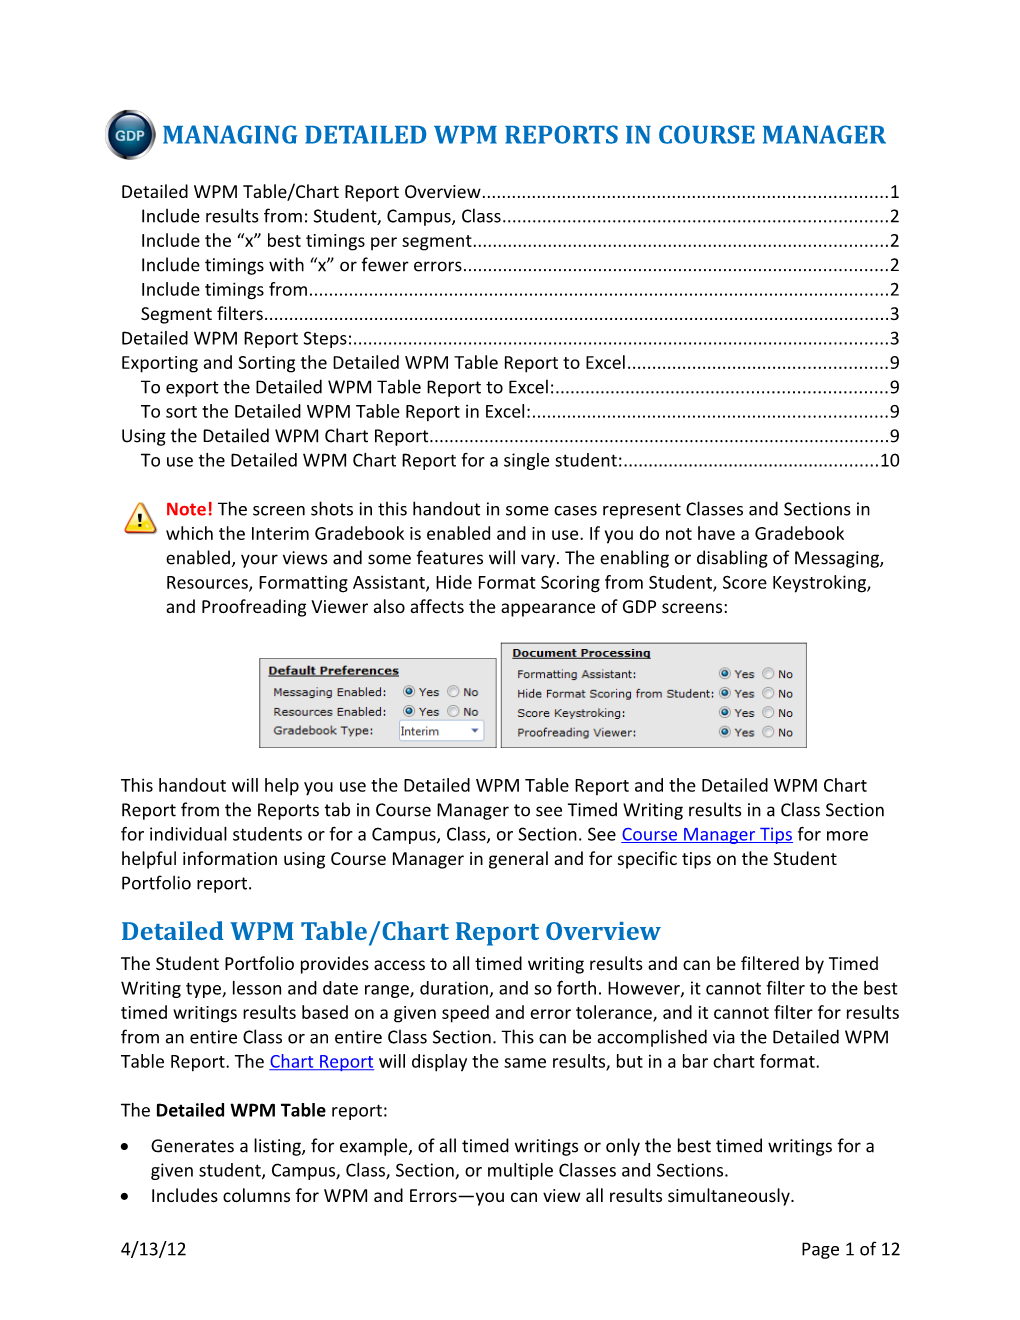 Detailed WPM Table/Chart Report Overview